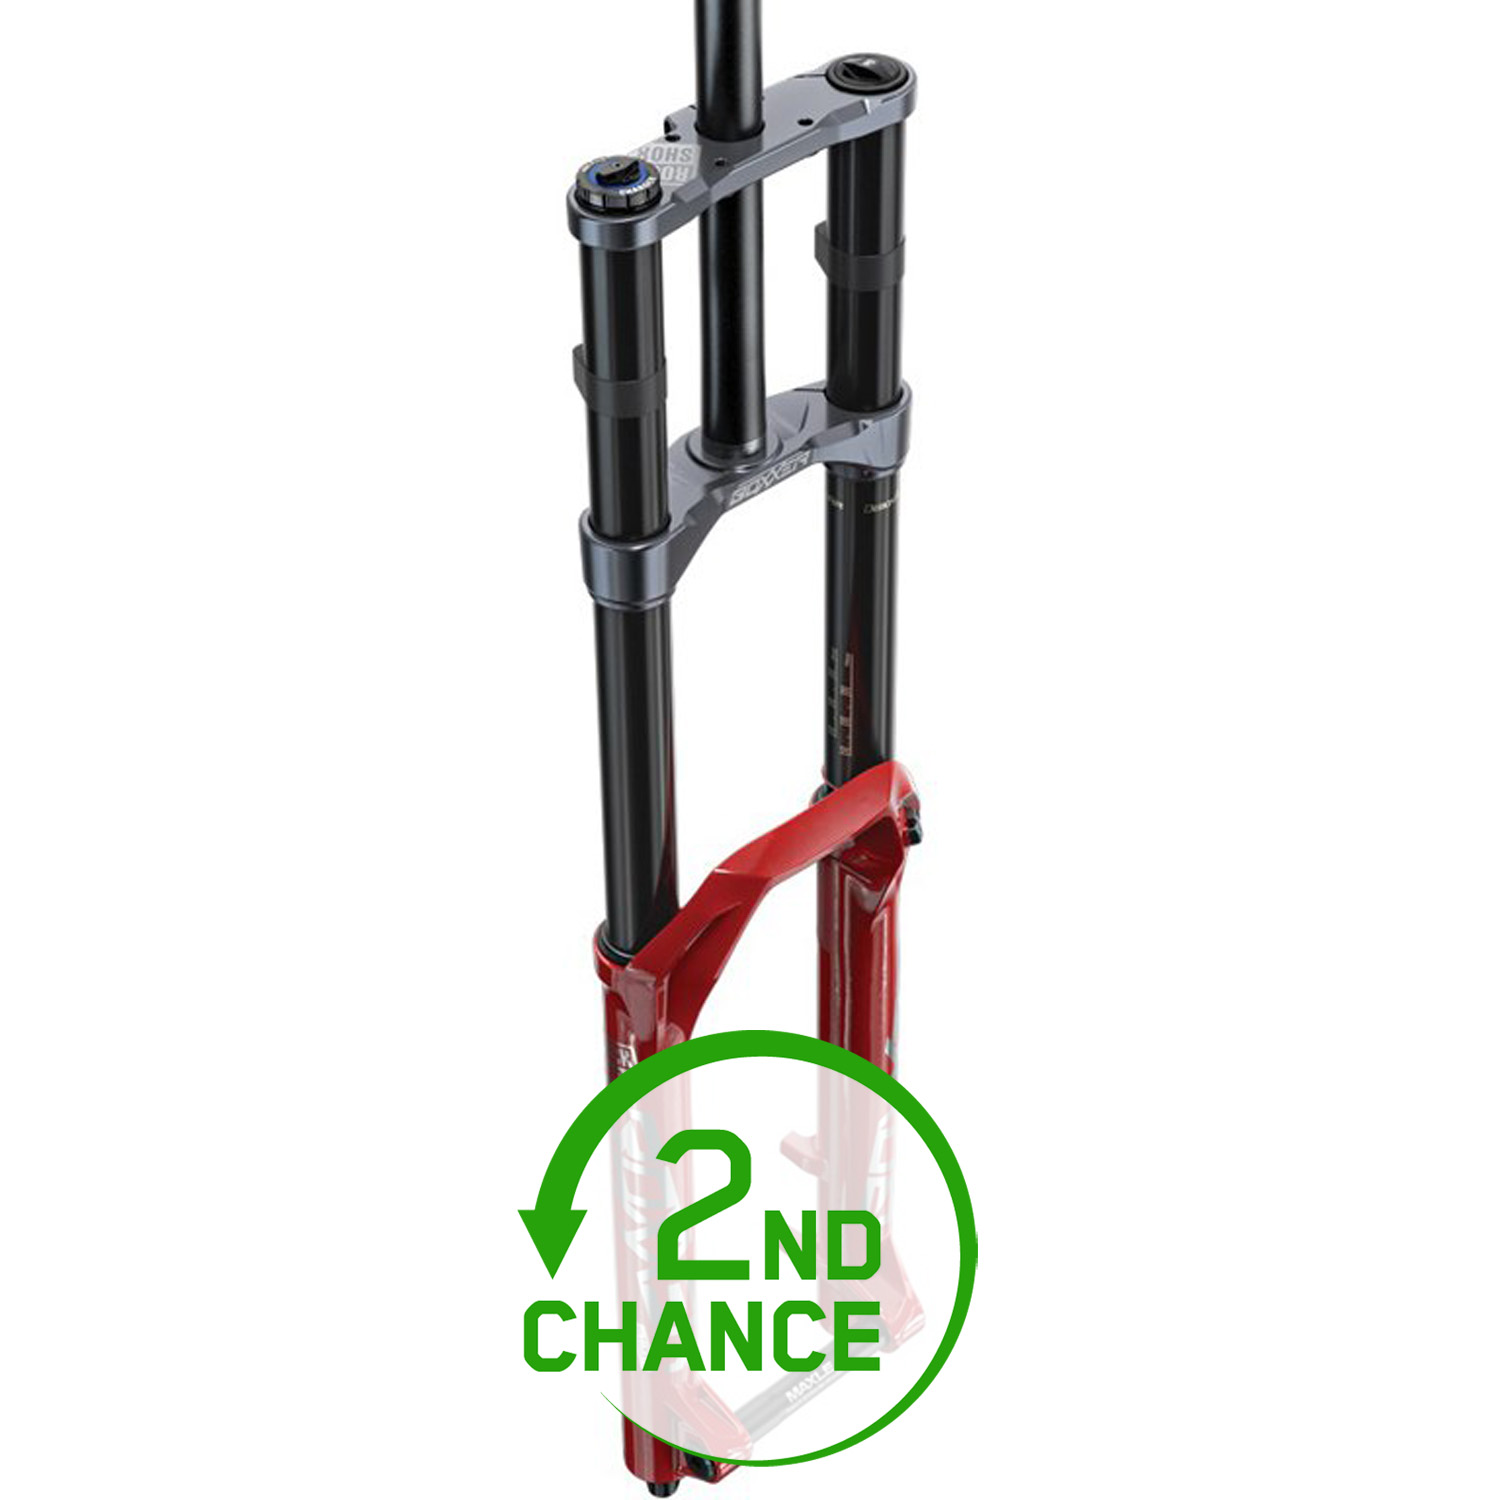 Produktbild von RockShox BoXXer Ultimate Charger 2.1 RC2 Debon Air Federgabel - 29&quot; | 200mm | 56mm Offset | Straight - 20x110 mm Boost Maxle Stealth - rot - B-Ware